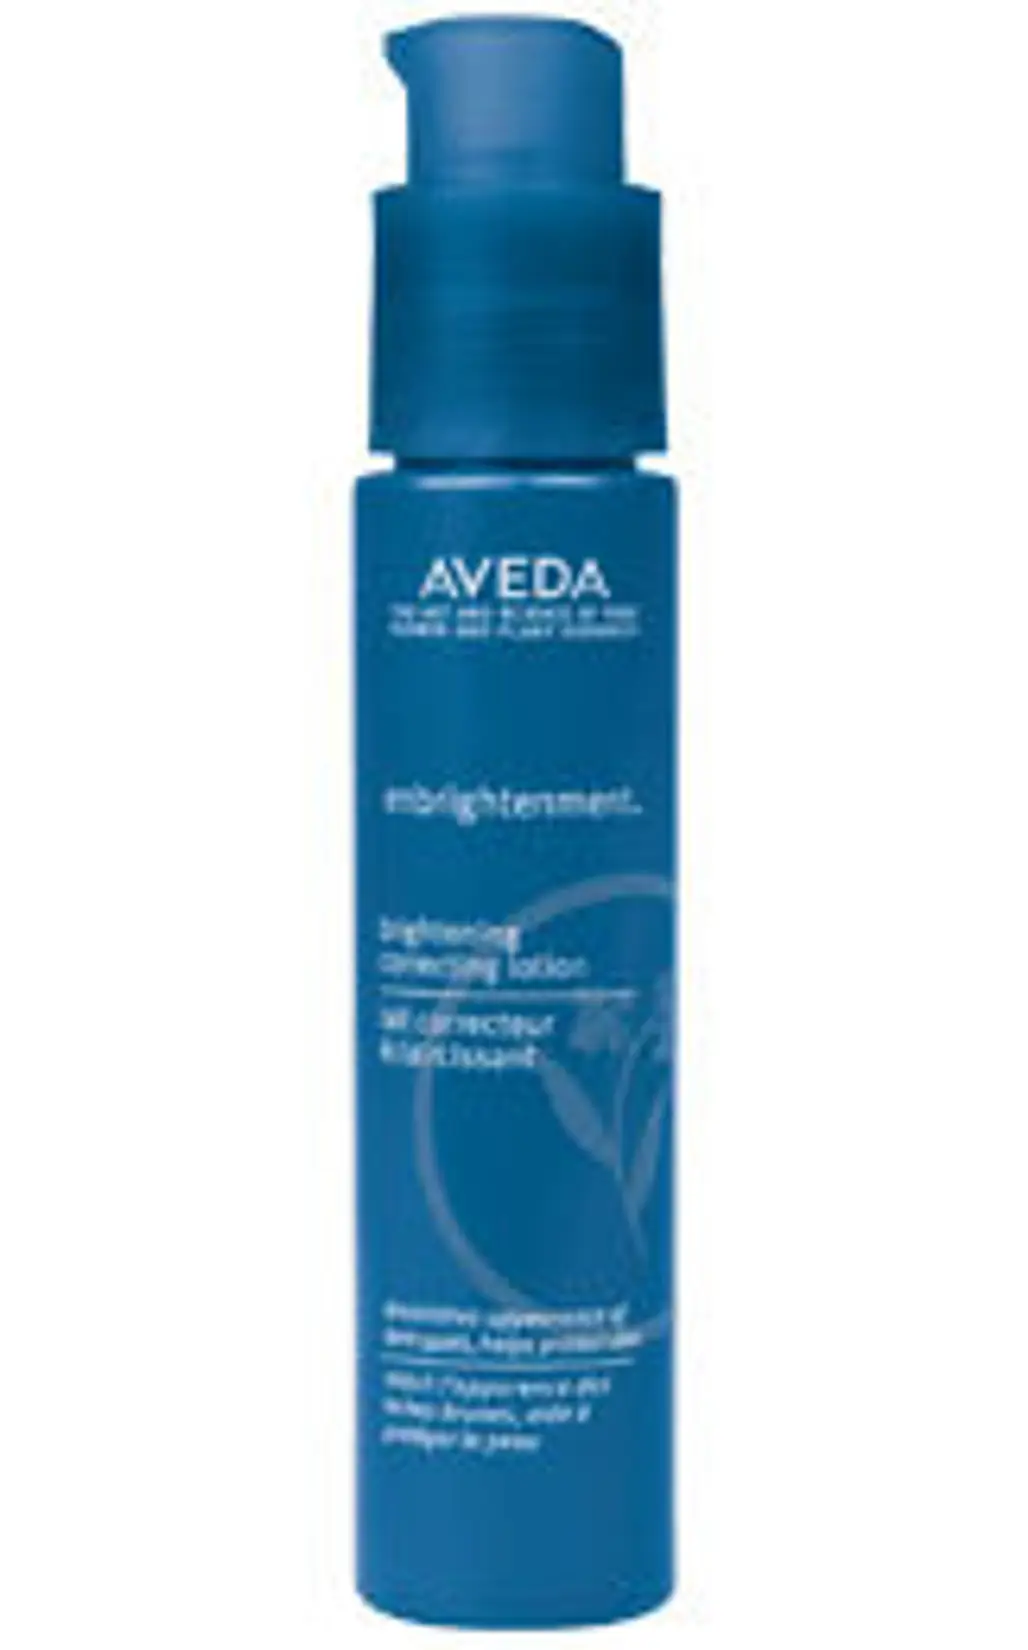 Aveda Enbrightenment Brightening Correcting Lotion